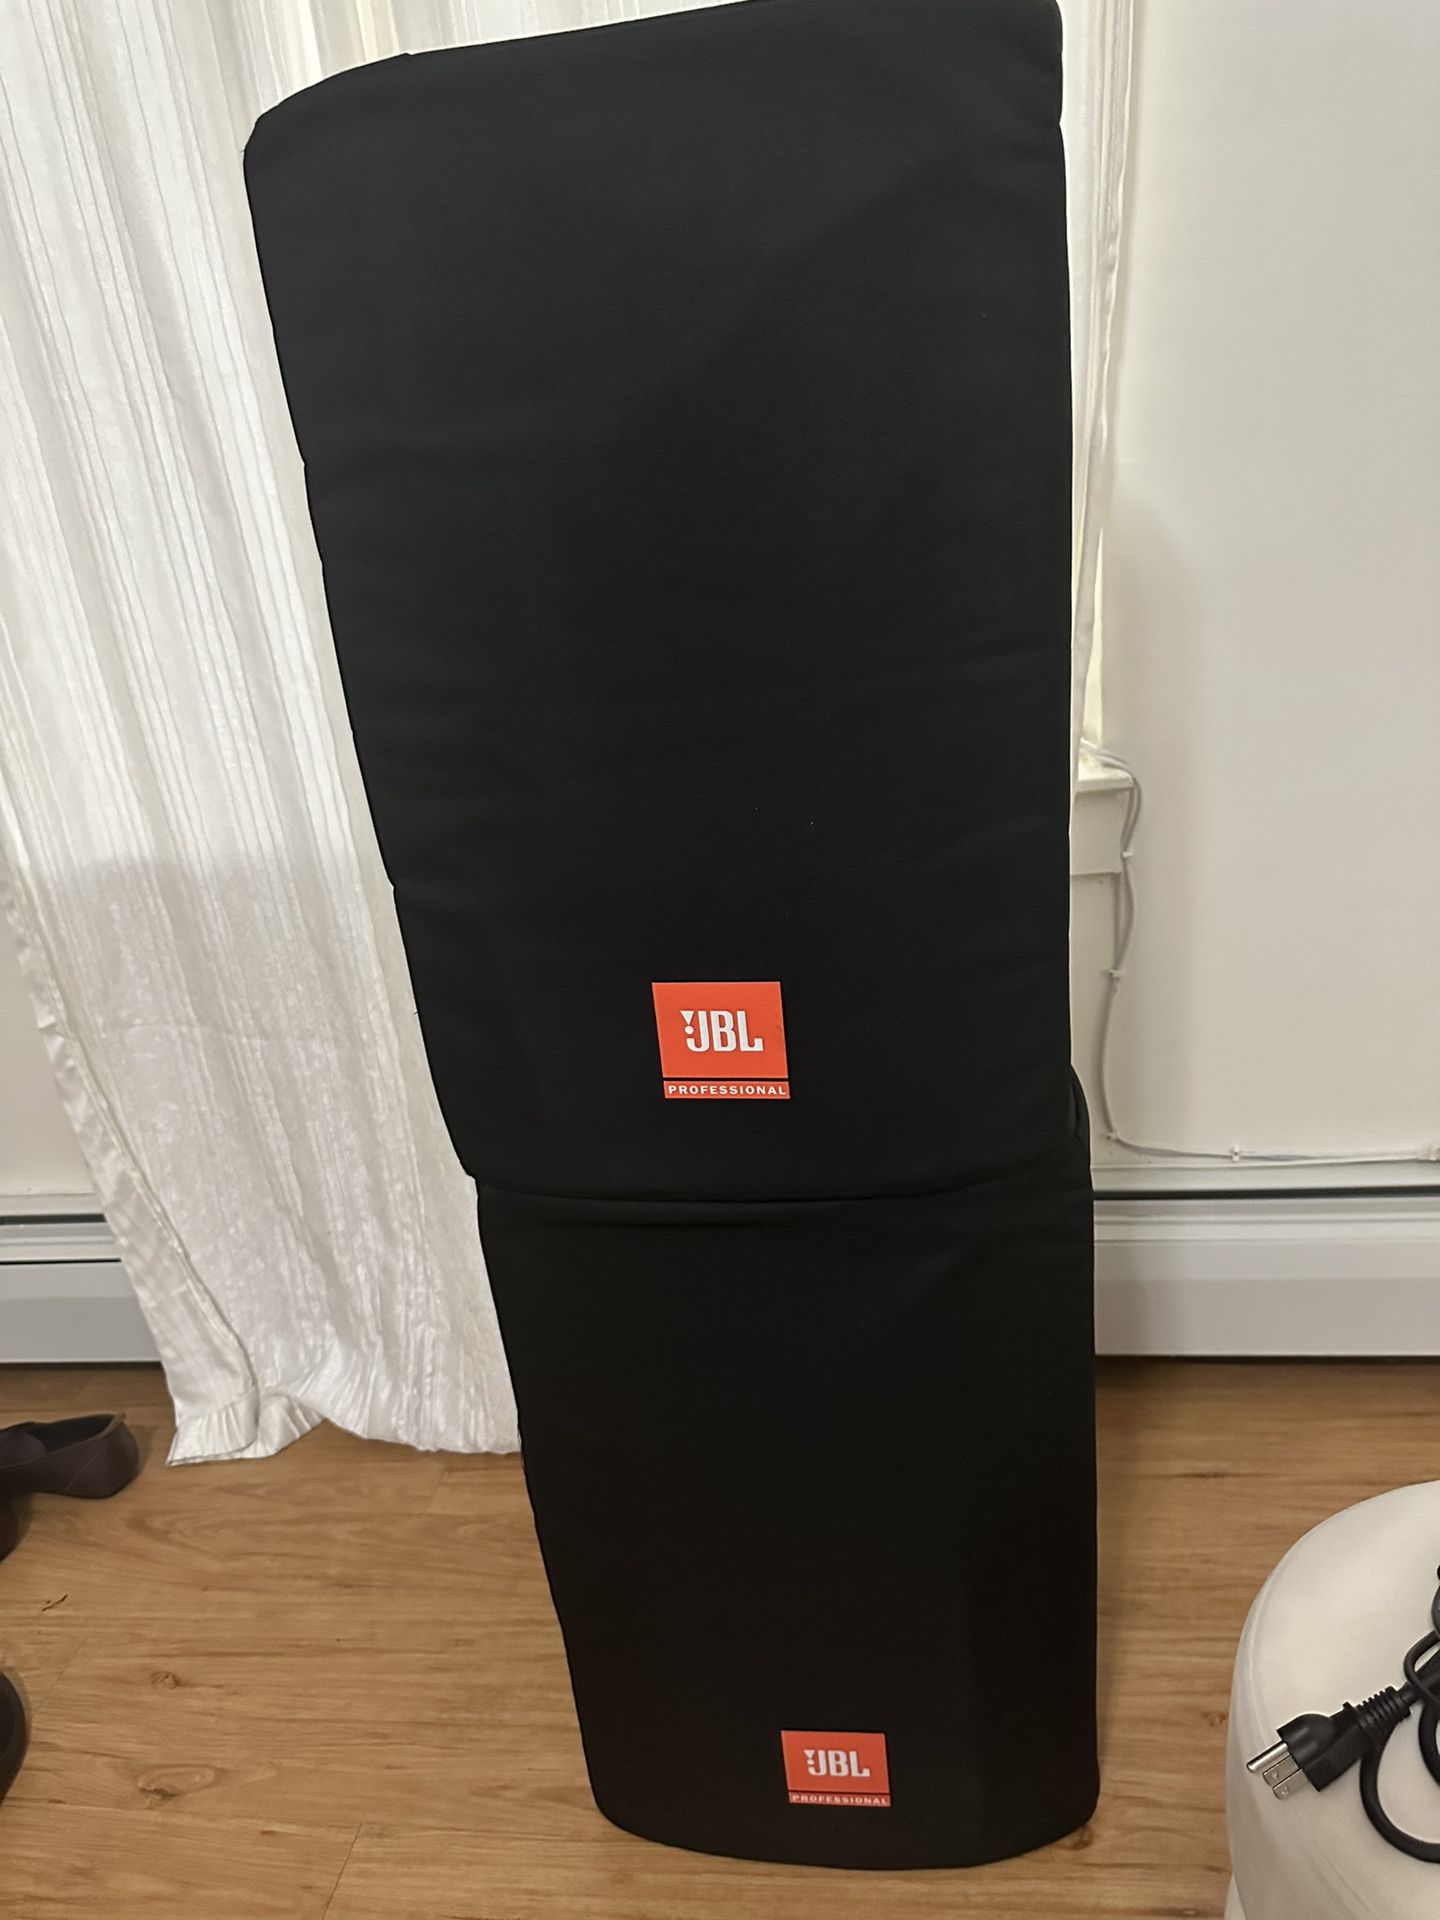 (2) Jbl Prx812w Plus Covers New Condition